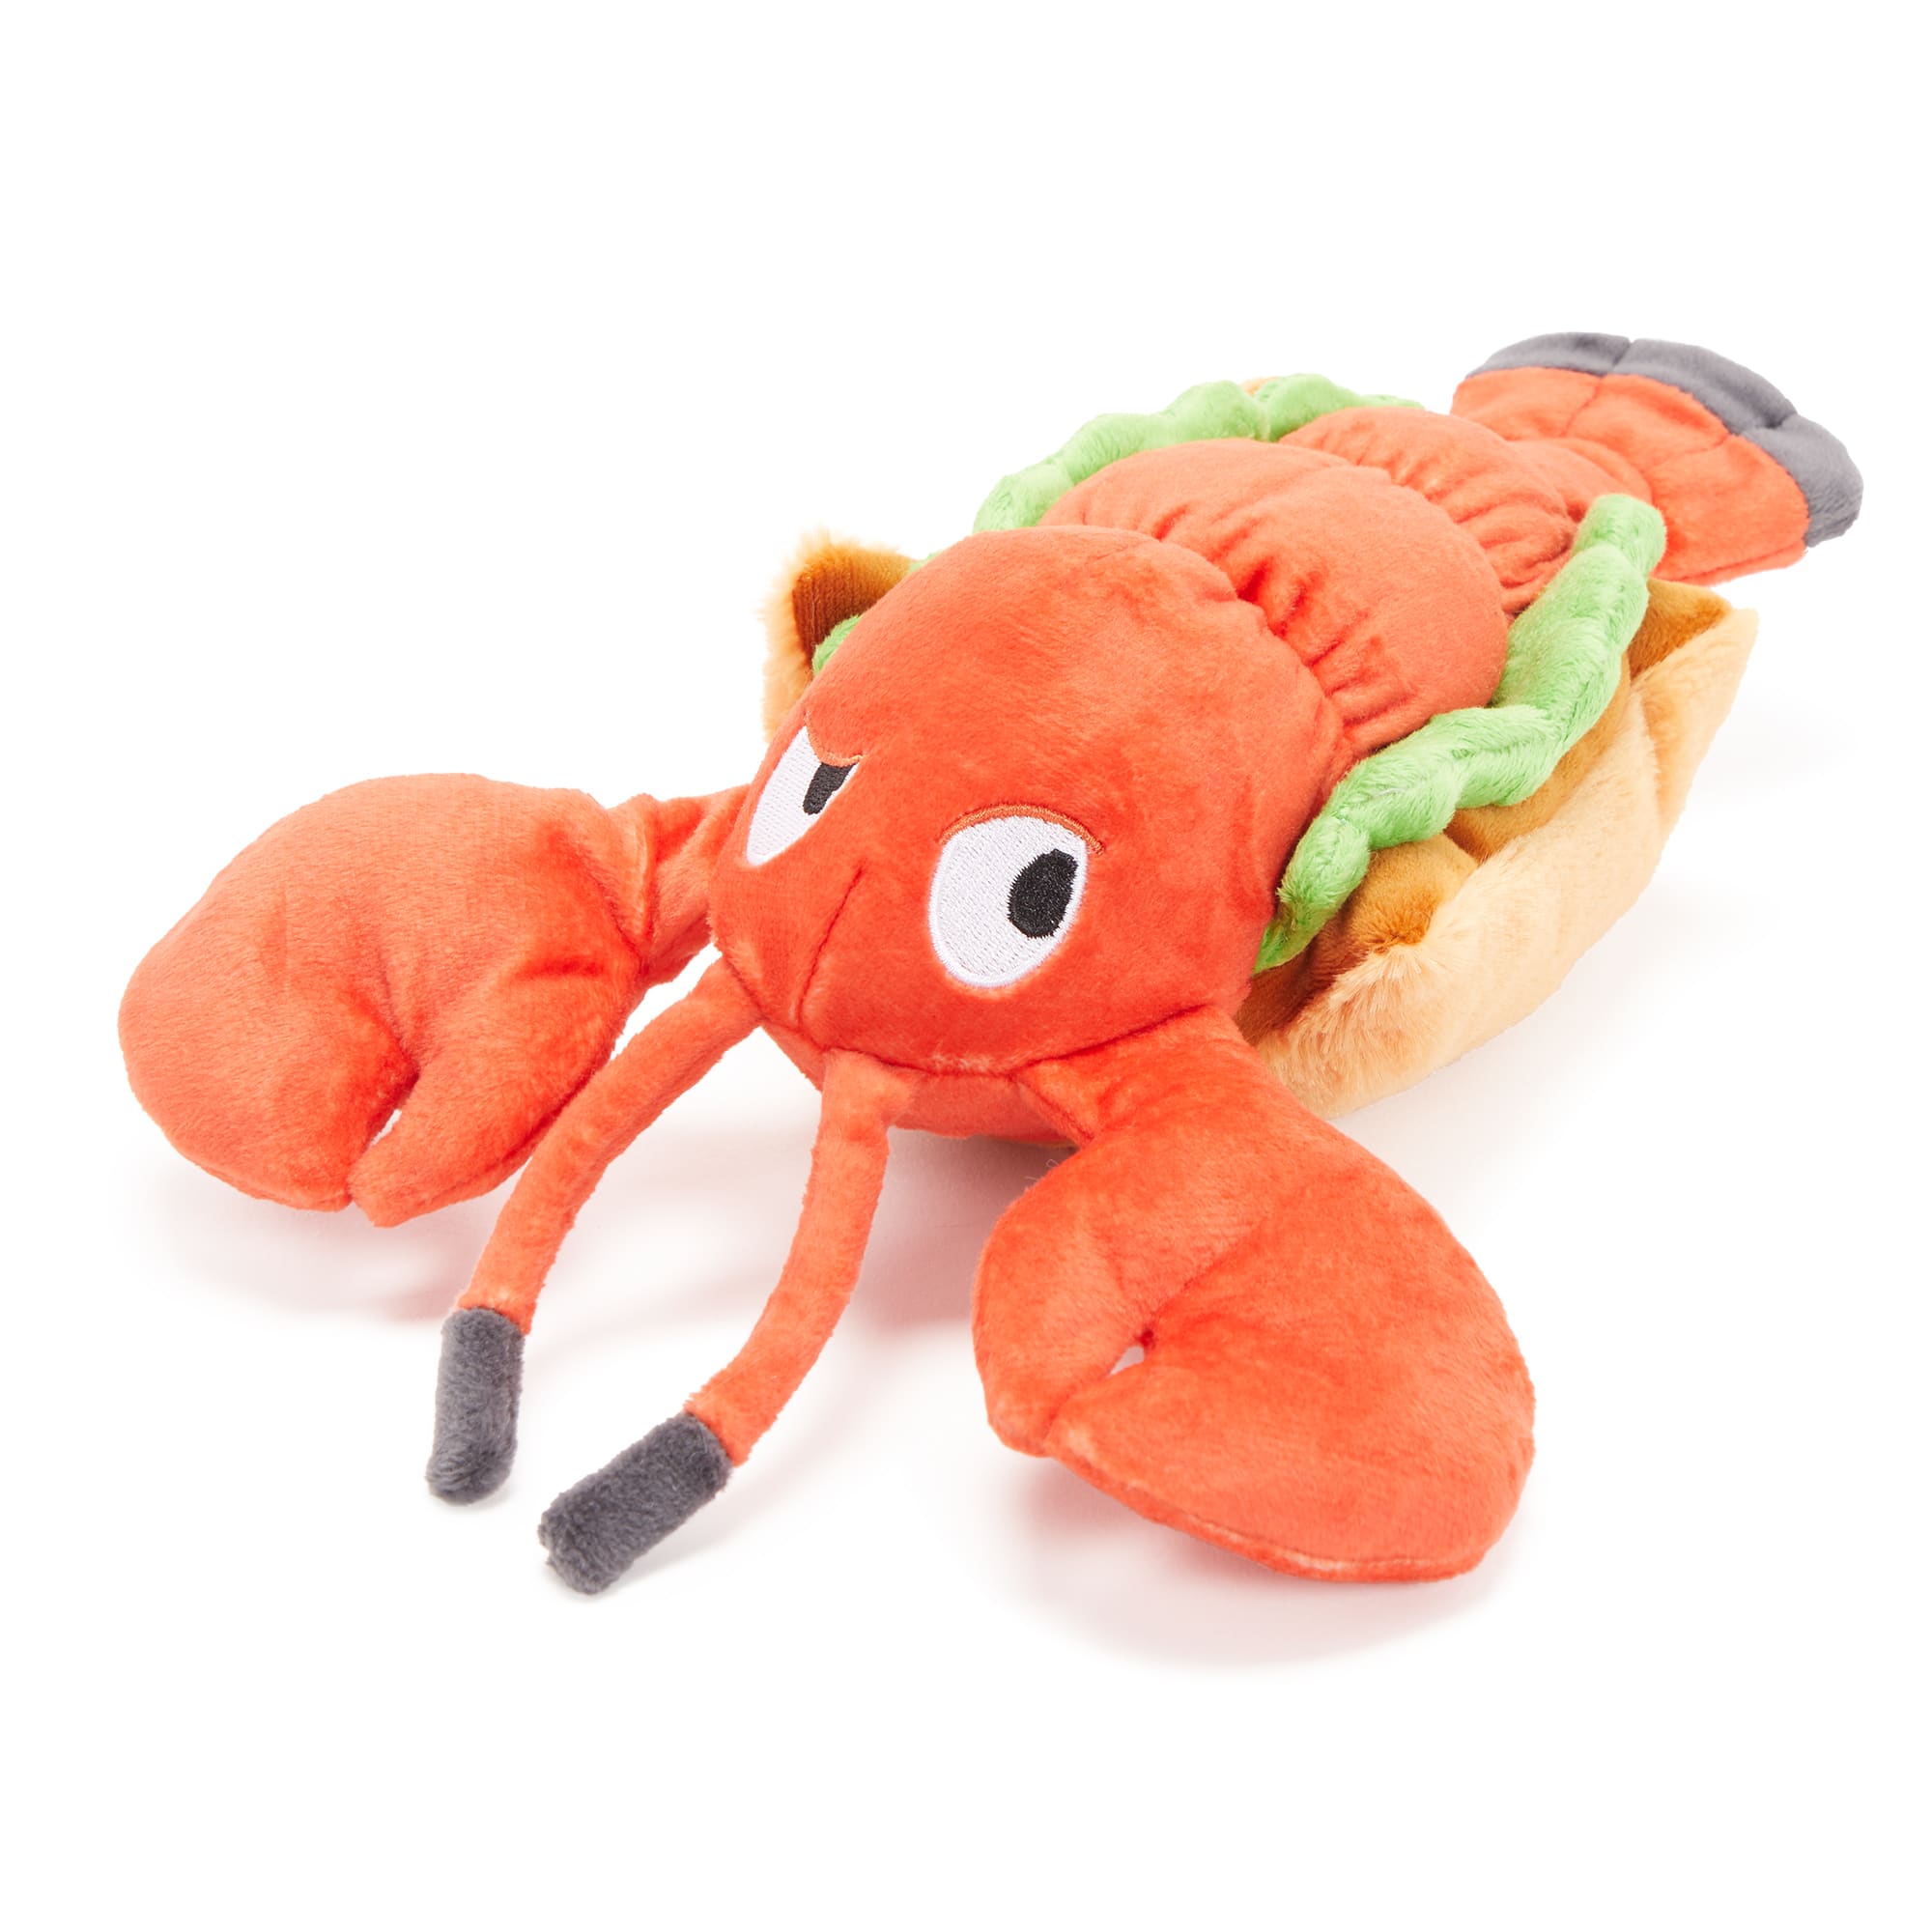 BARK Max's Maine Lobster Roll Dog Toy 